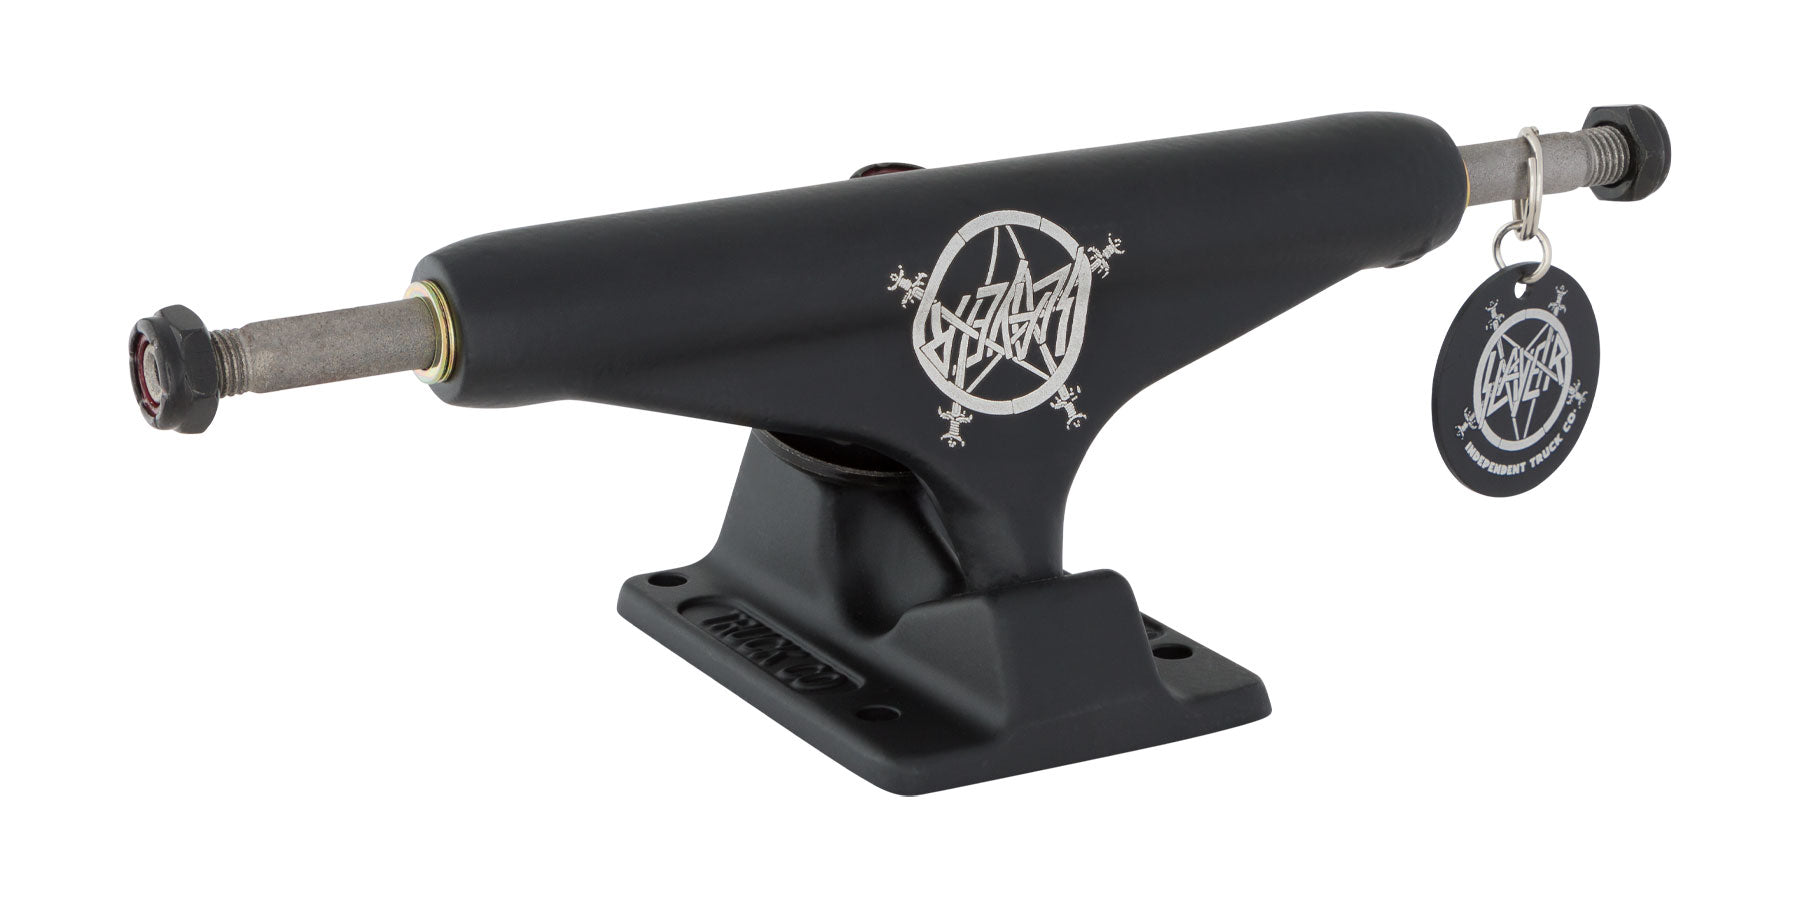 Forged Hollow Stage XI Skate Trucks | Independent x Slayer Collab